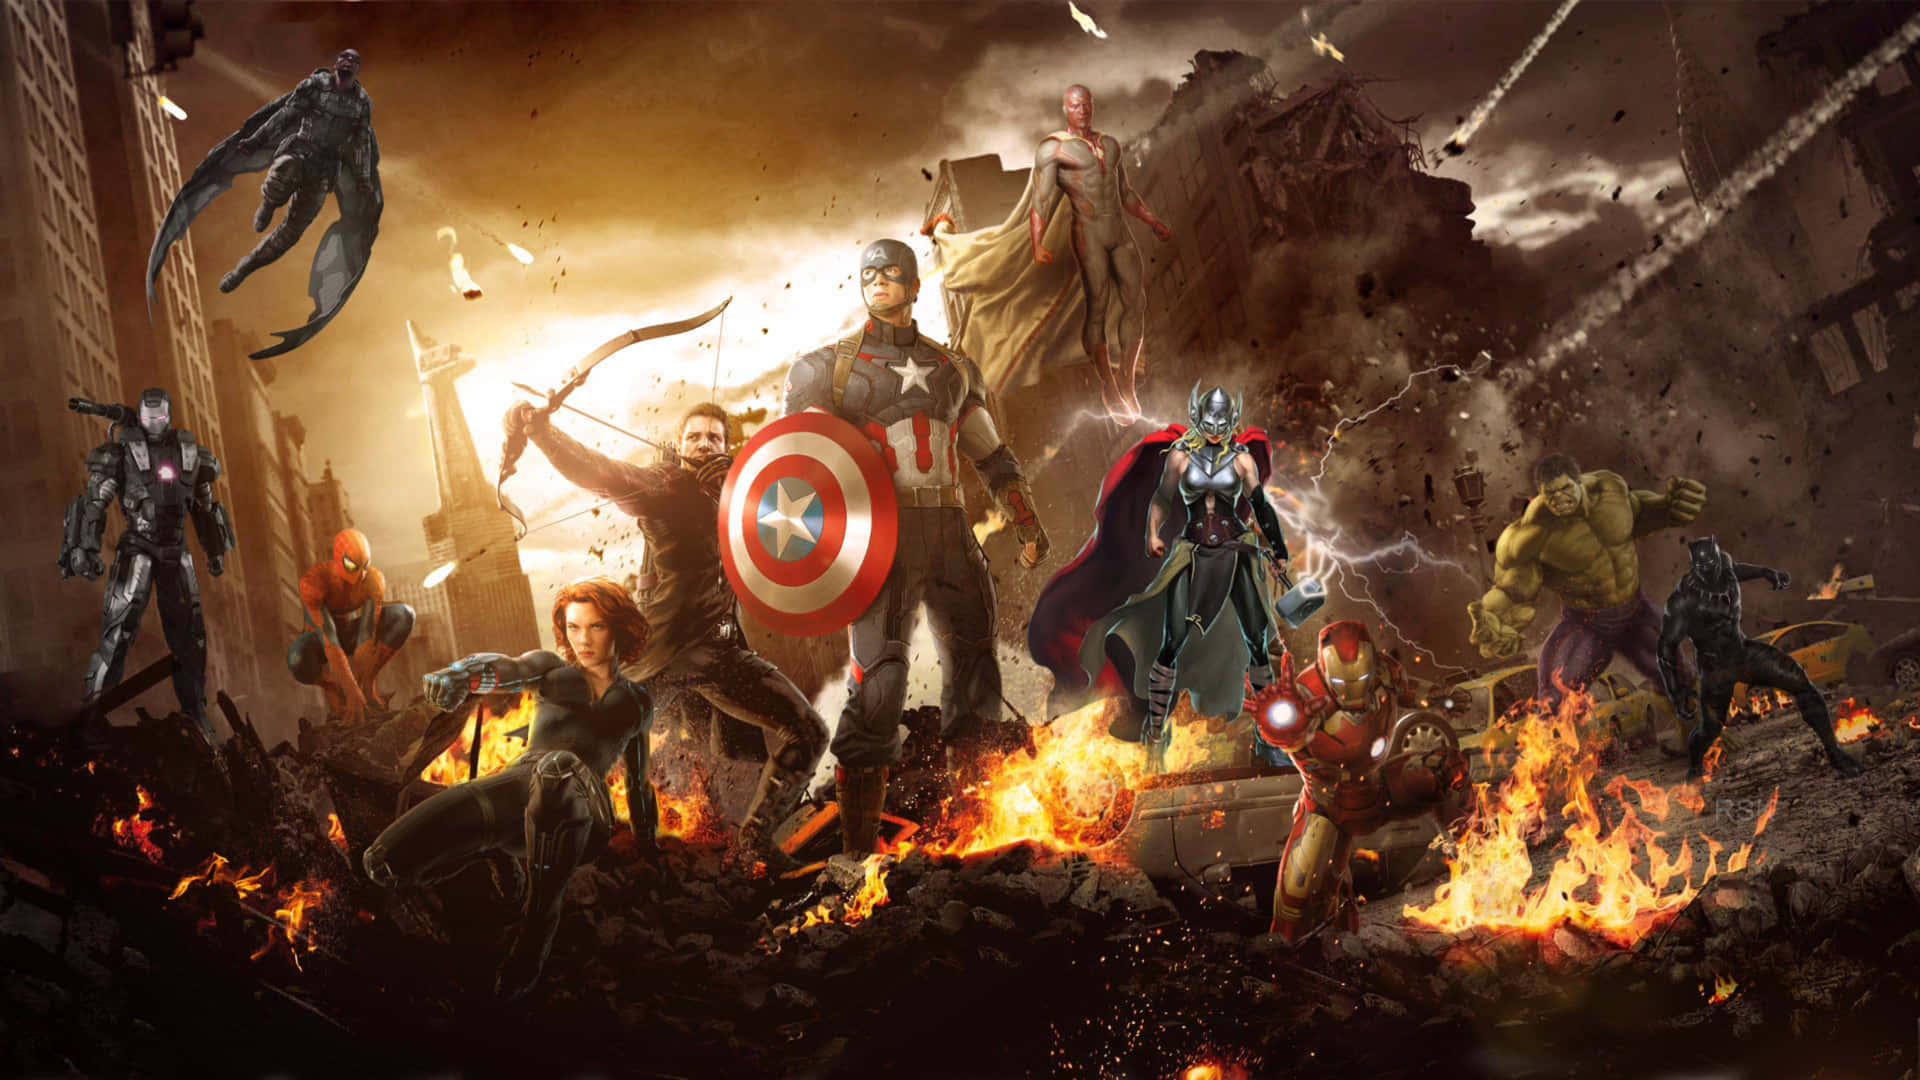 "The Avengers are ready to save the world" Wallpaper